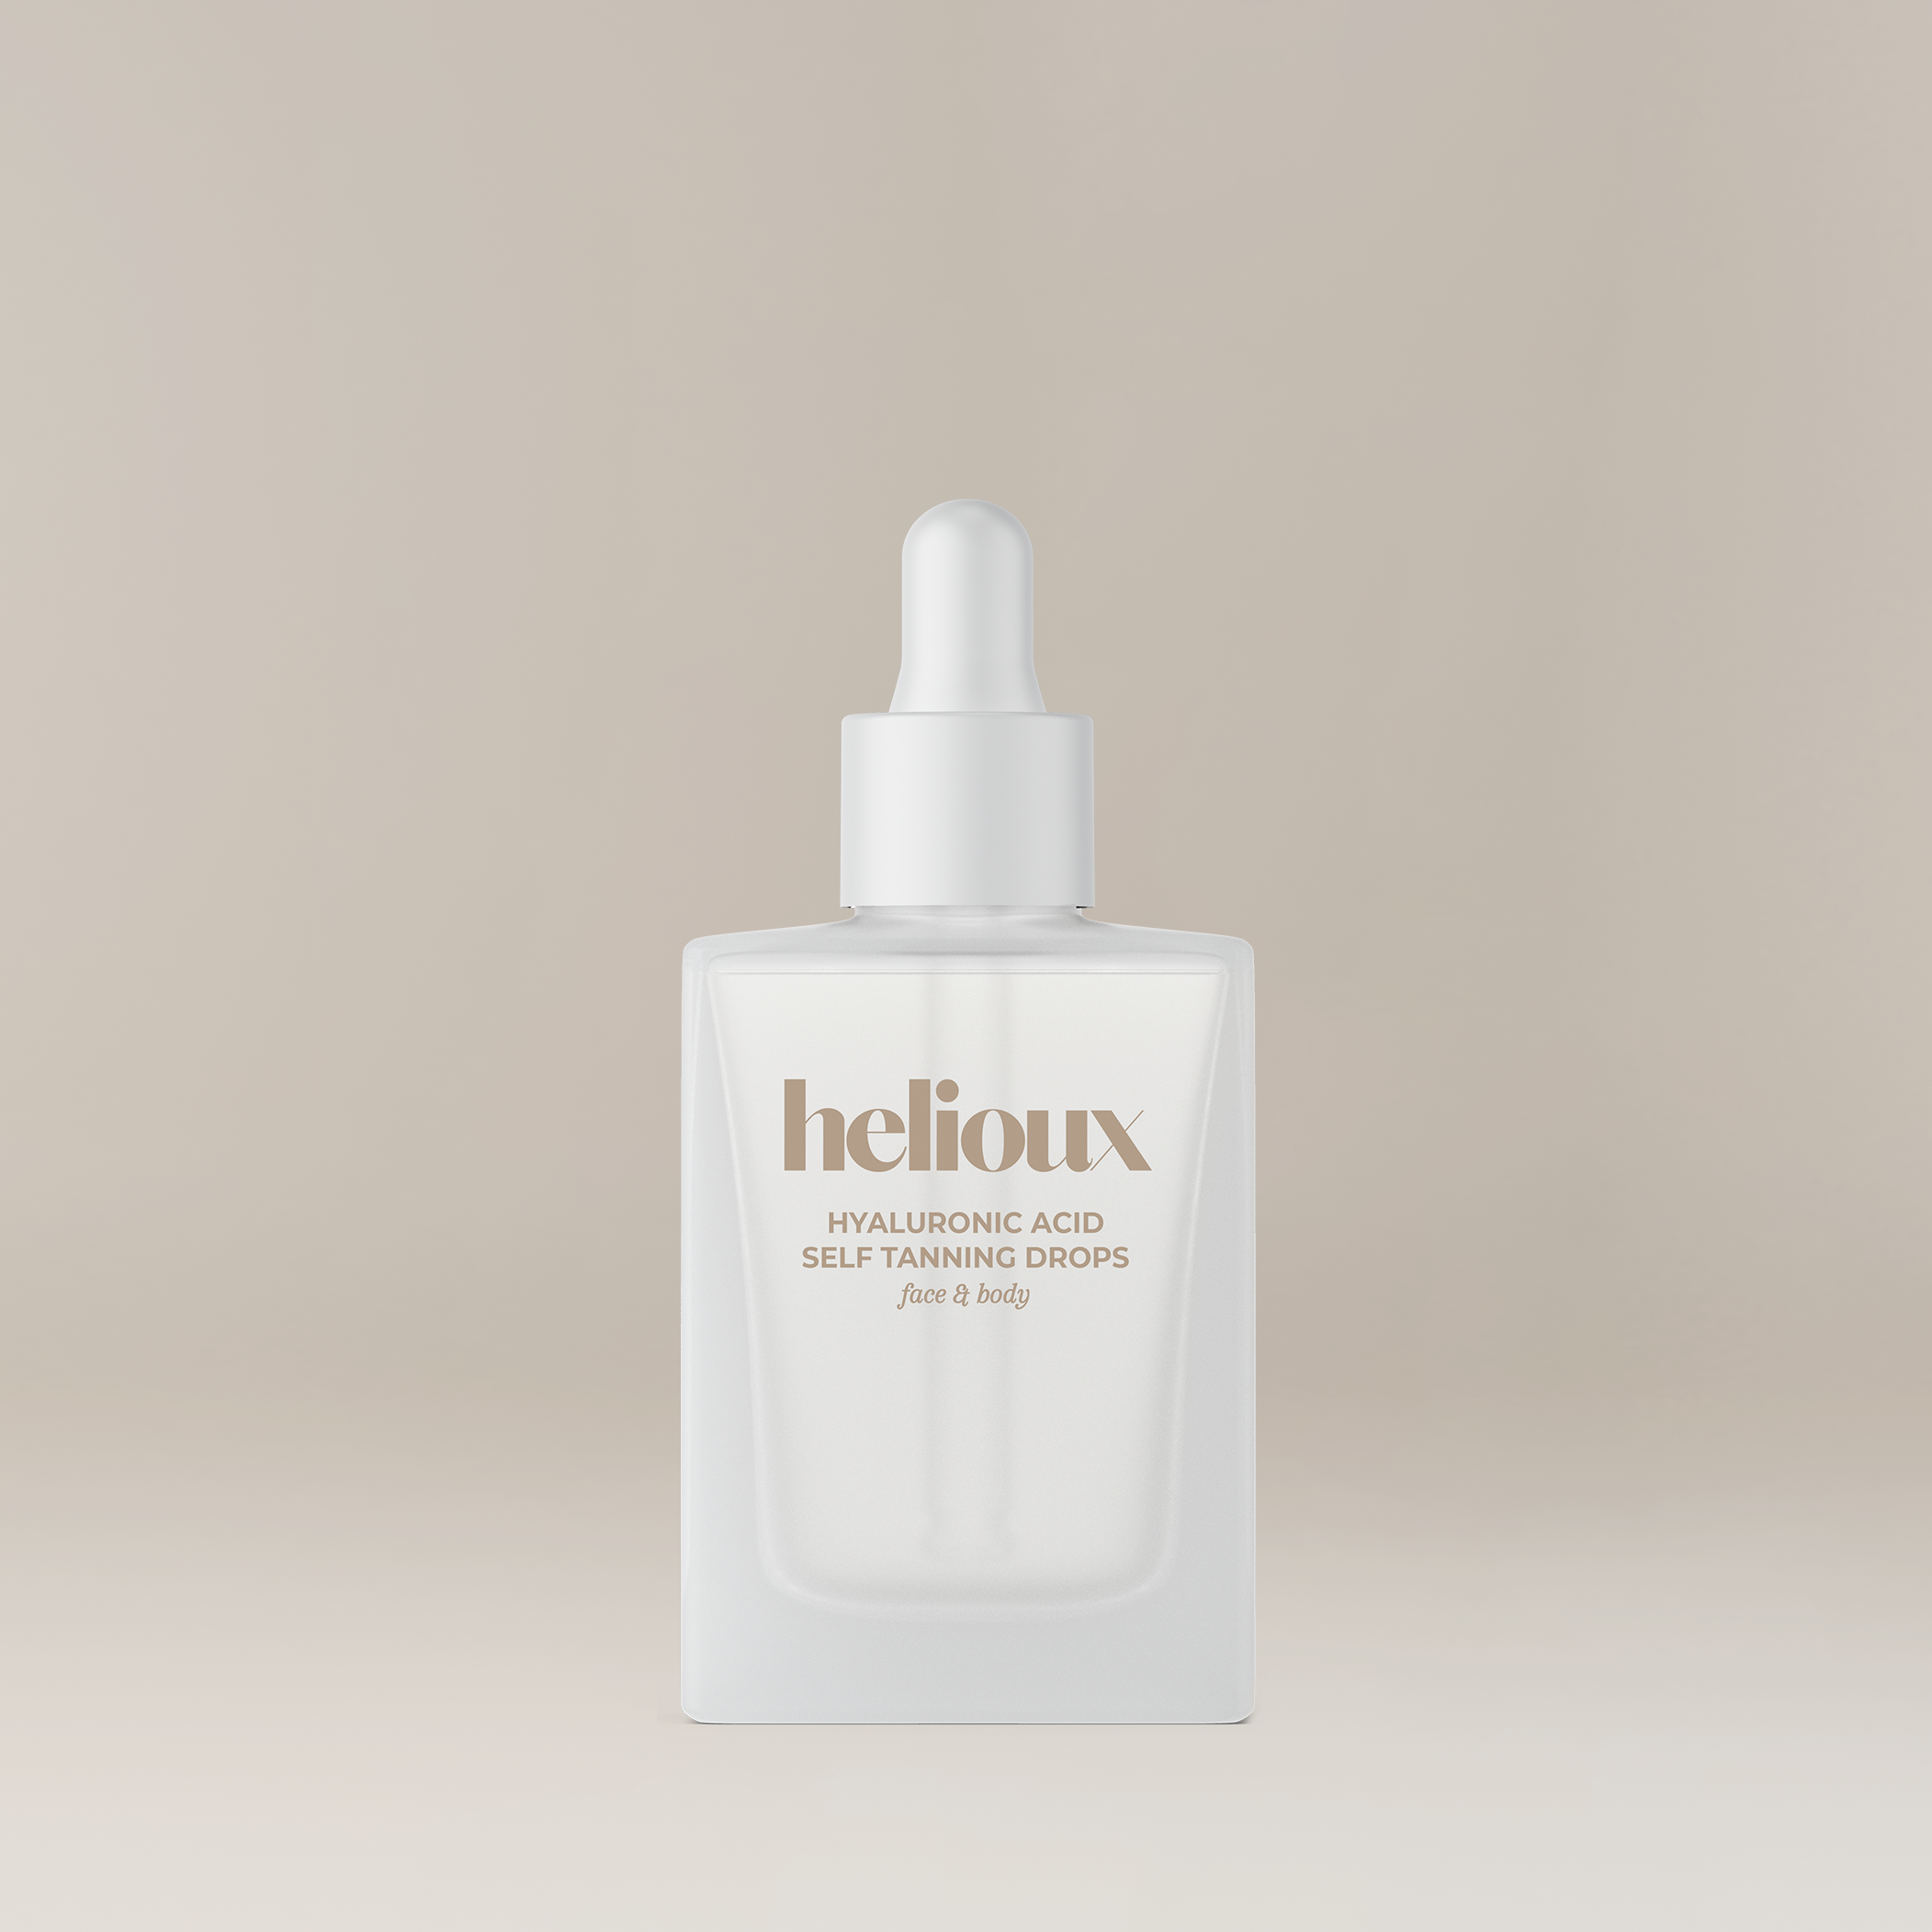 HYALURONIC ACID SELF TANNING DROPS